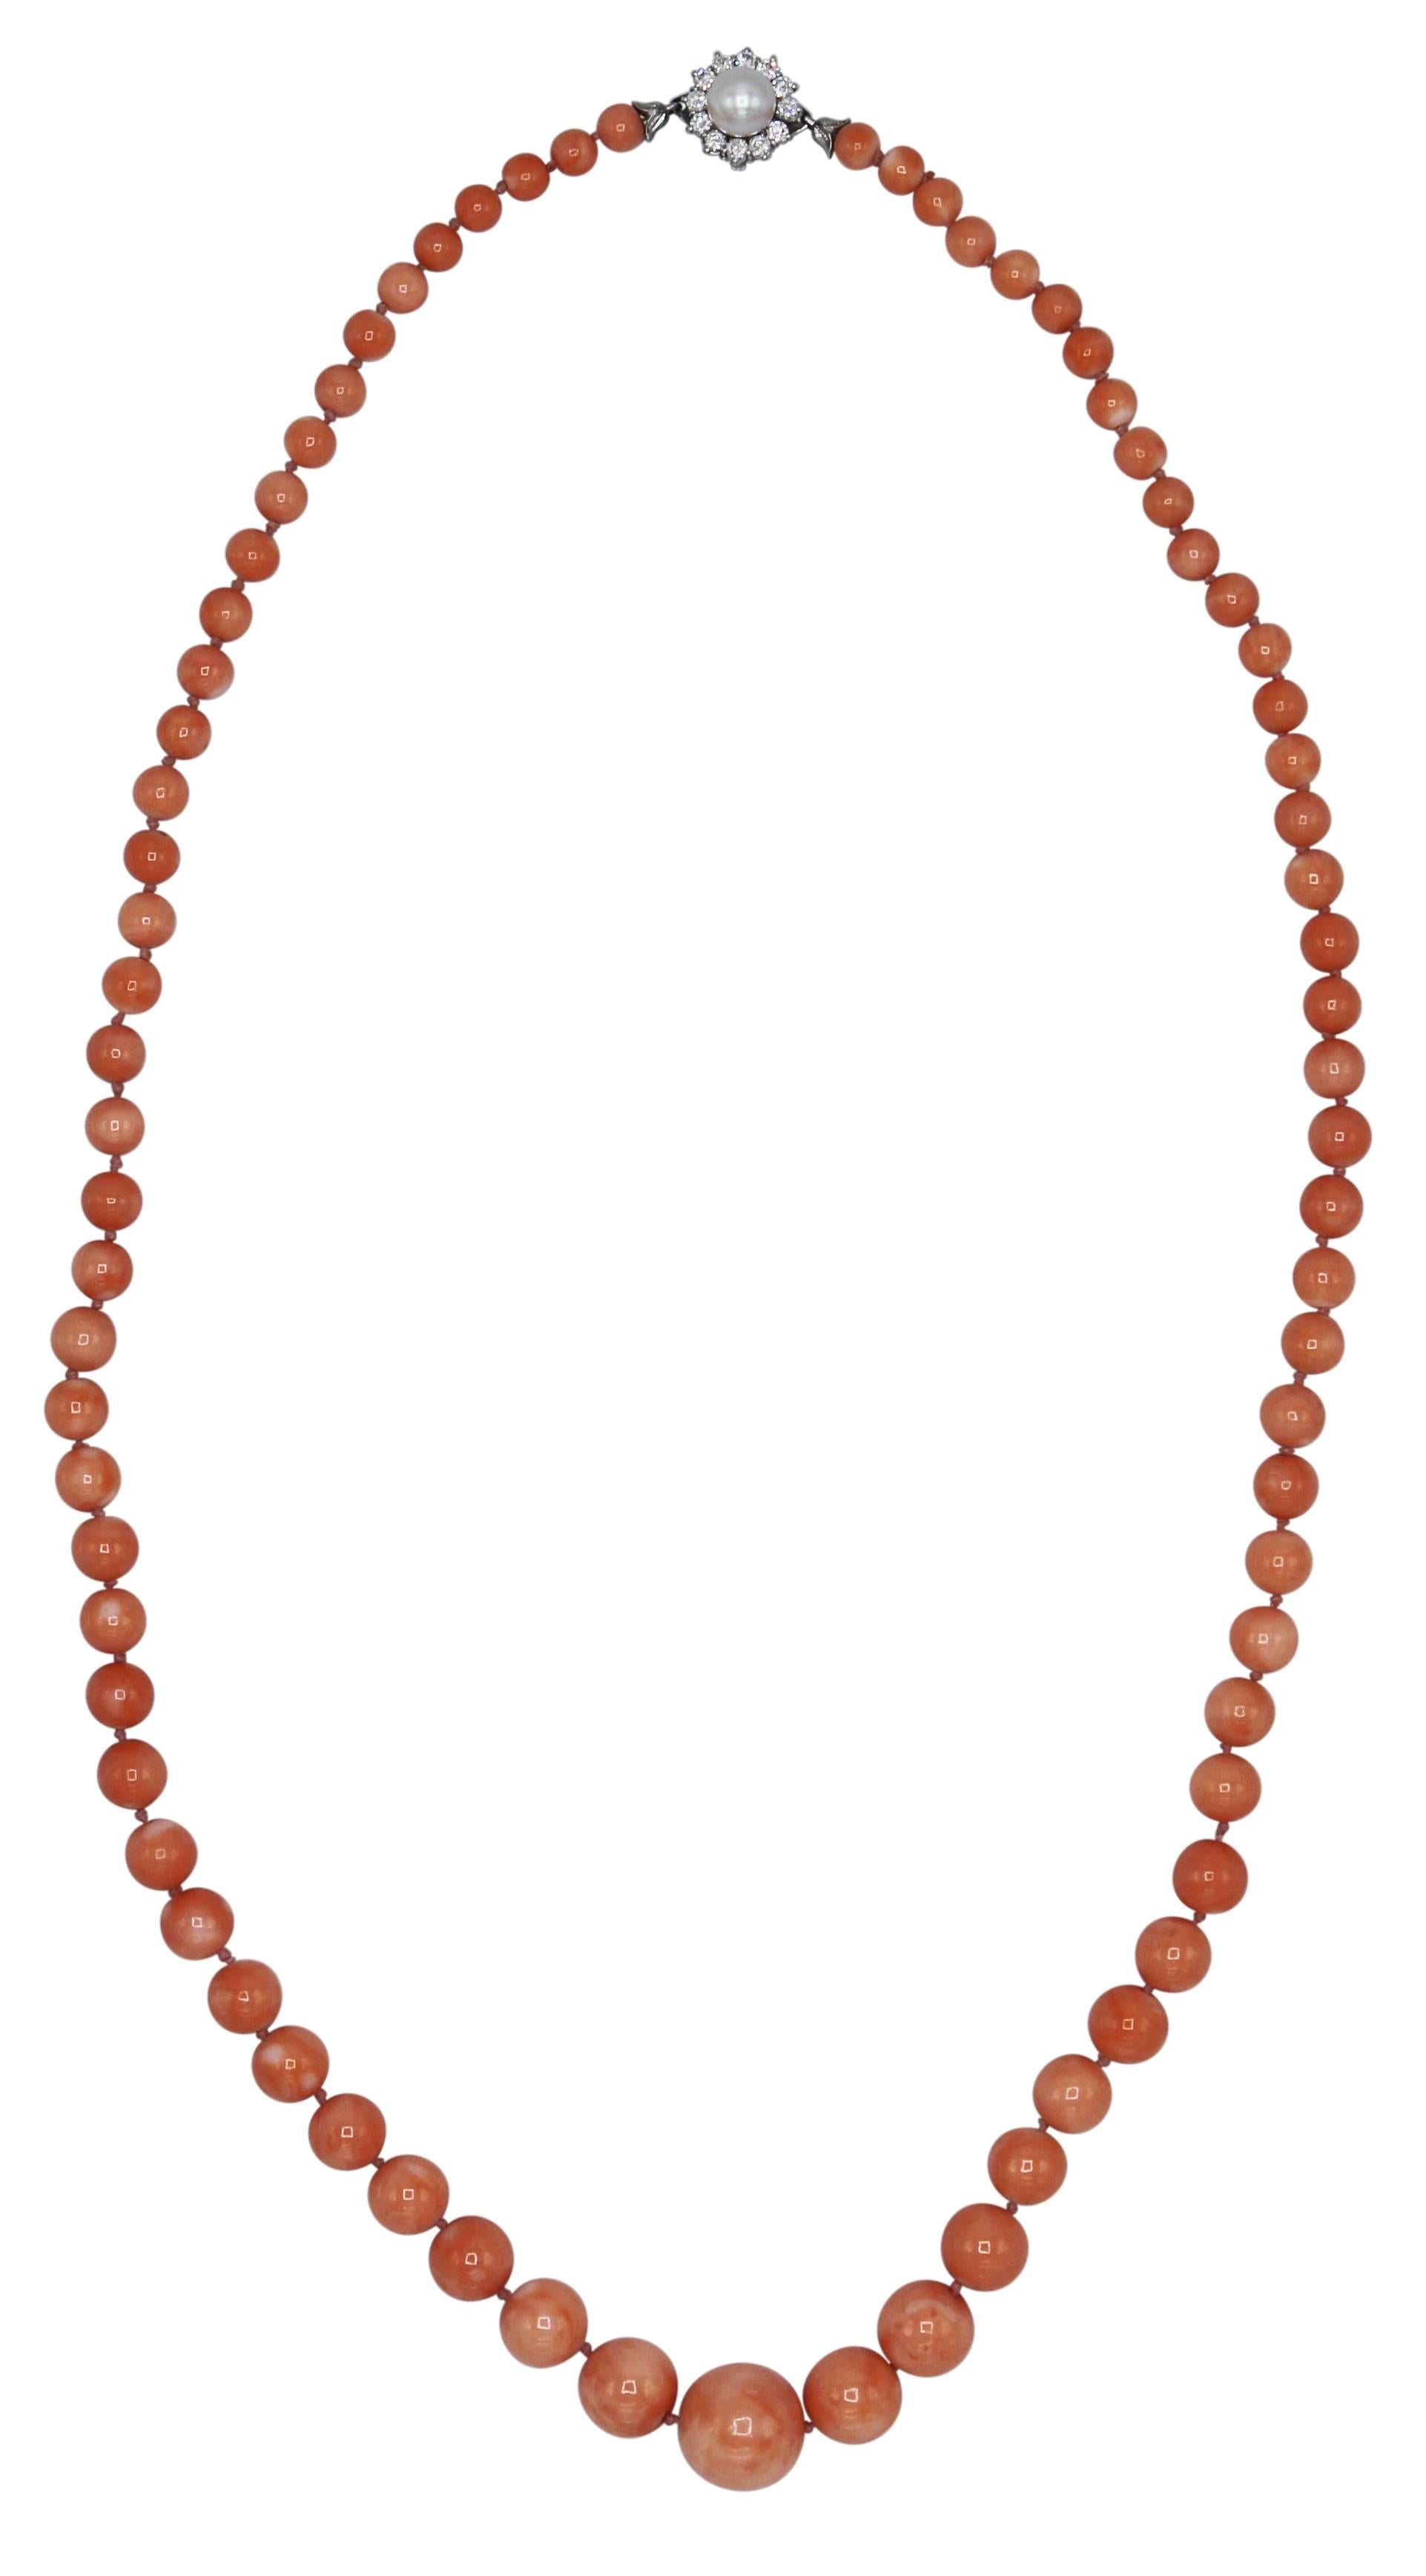 18 karat white gold, natural angel skin coral bead, pearl and diamond necklace, the single strand of graduated design composed of natural and untreated Japanese angel skin coral beads measuring 17.0 to 7.0 mm., completed by a clasp set with a